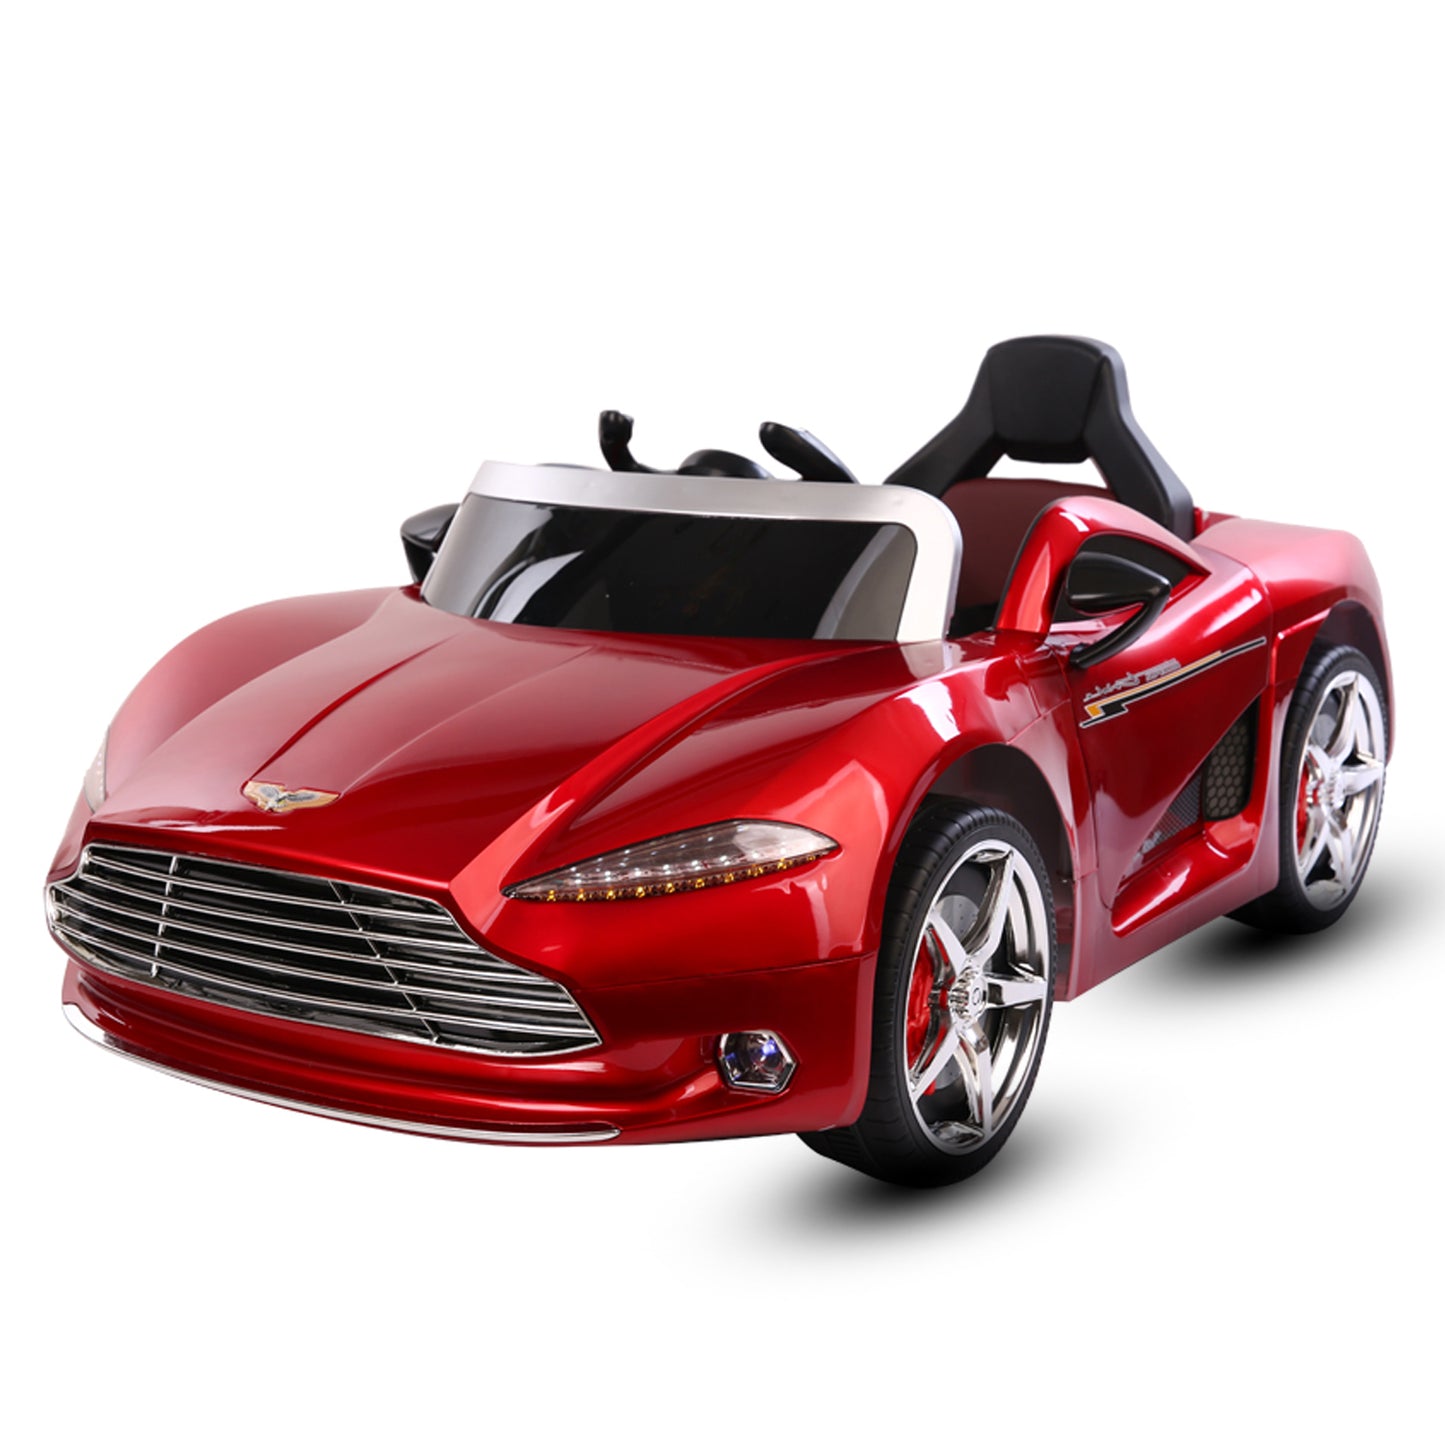 Aston Martin Kids Car | Rechargeable Battery Operated Ride on car for Kids | Leather seat